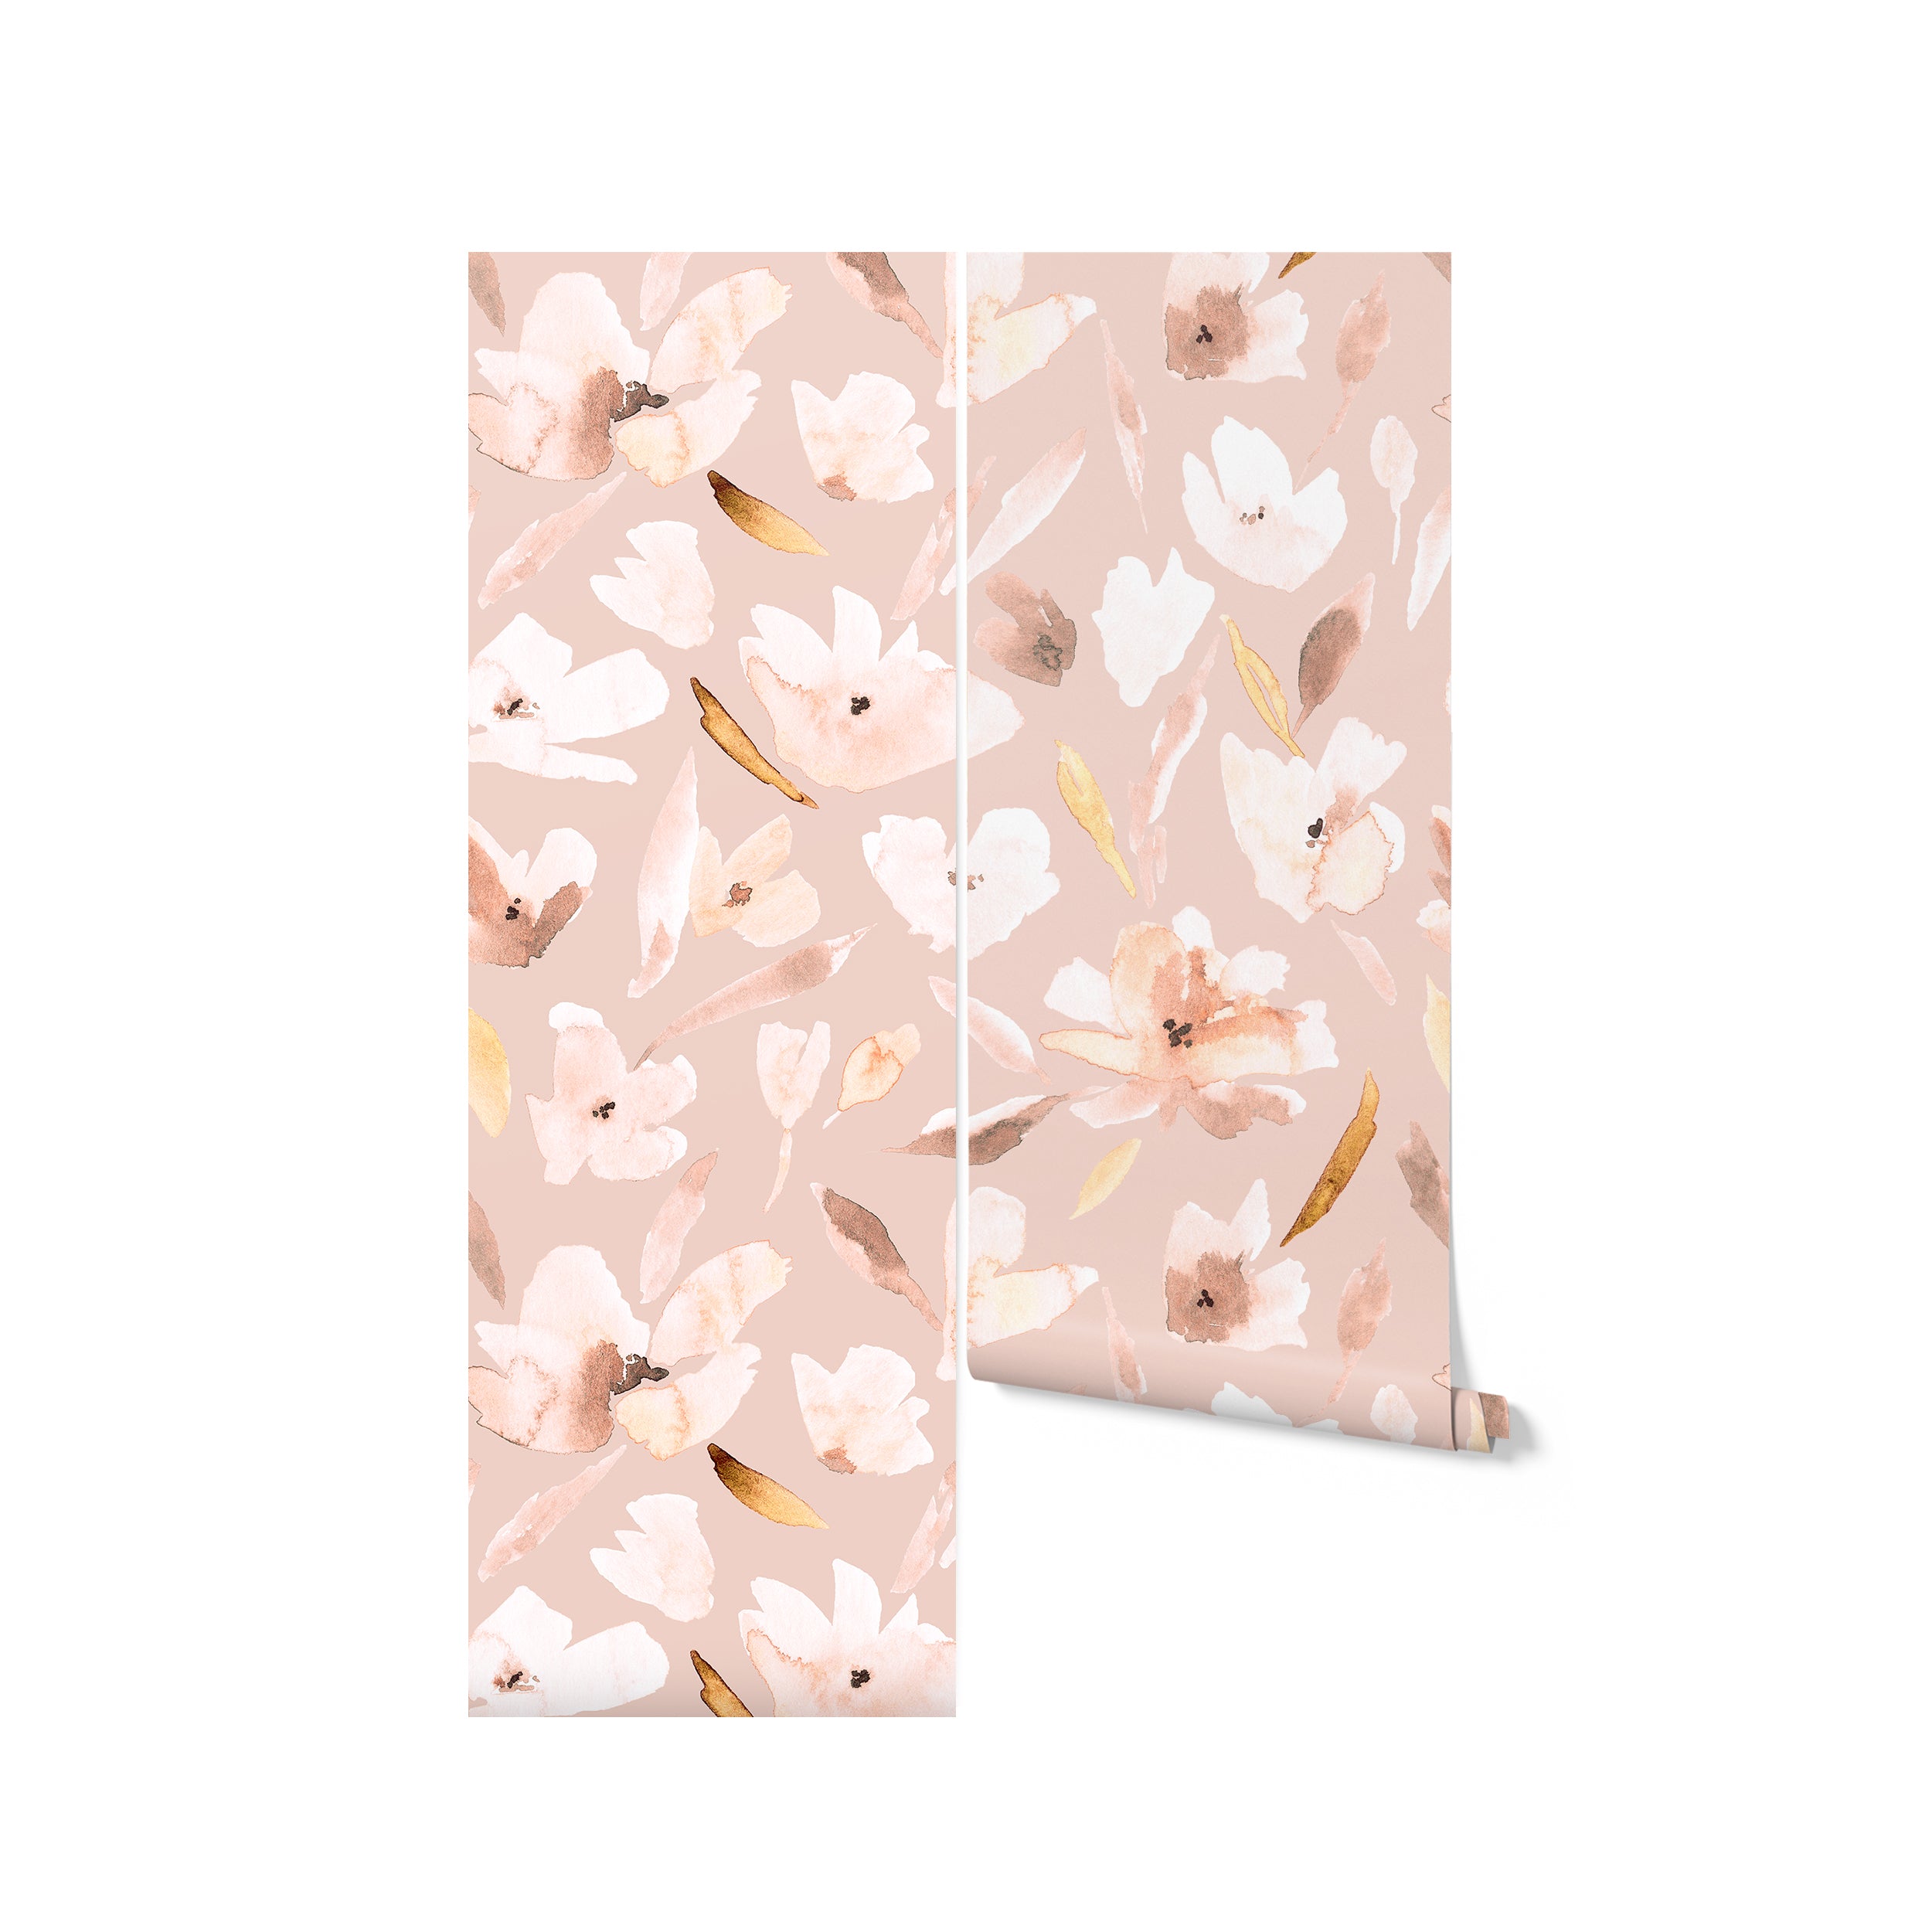 A roll of Prettiest in Pink Floral Wallpaper, revealing the beautiful and continuous flow of the watercolor floral pattern that radiates femininity and elegance, ready to transform a room into a peaceful and pretty sanctuary.